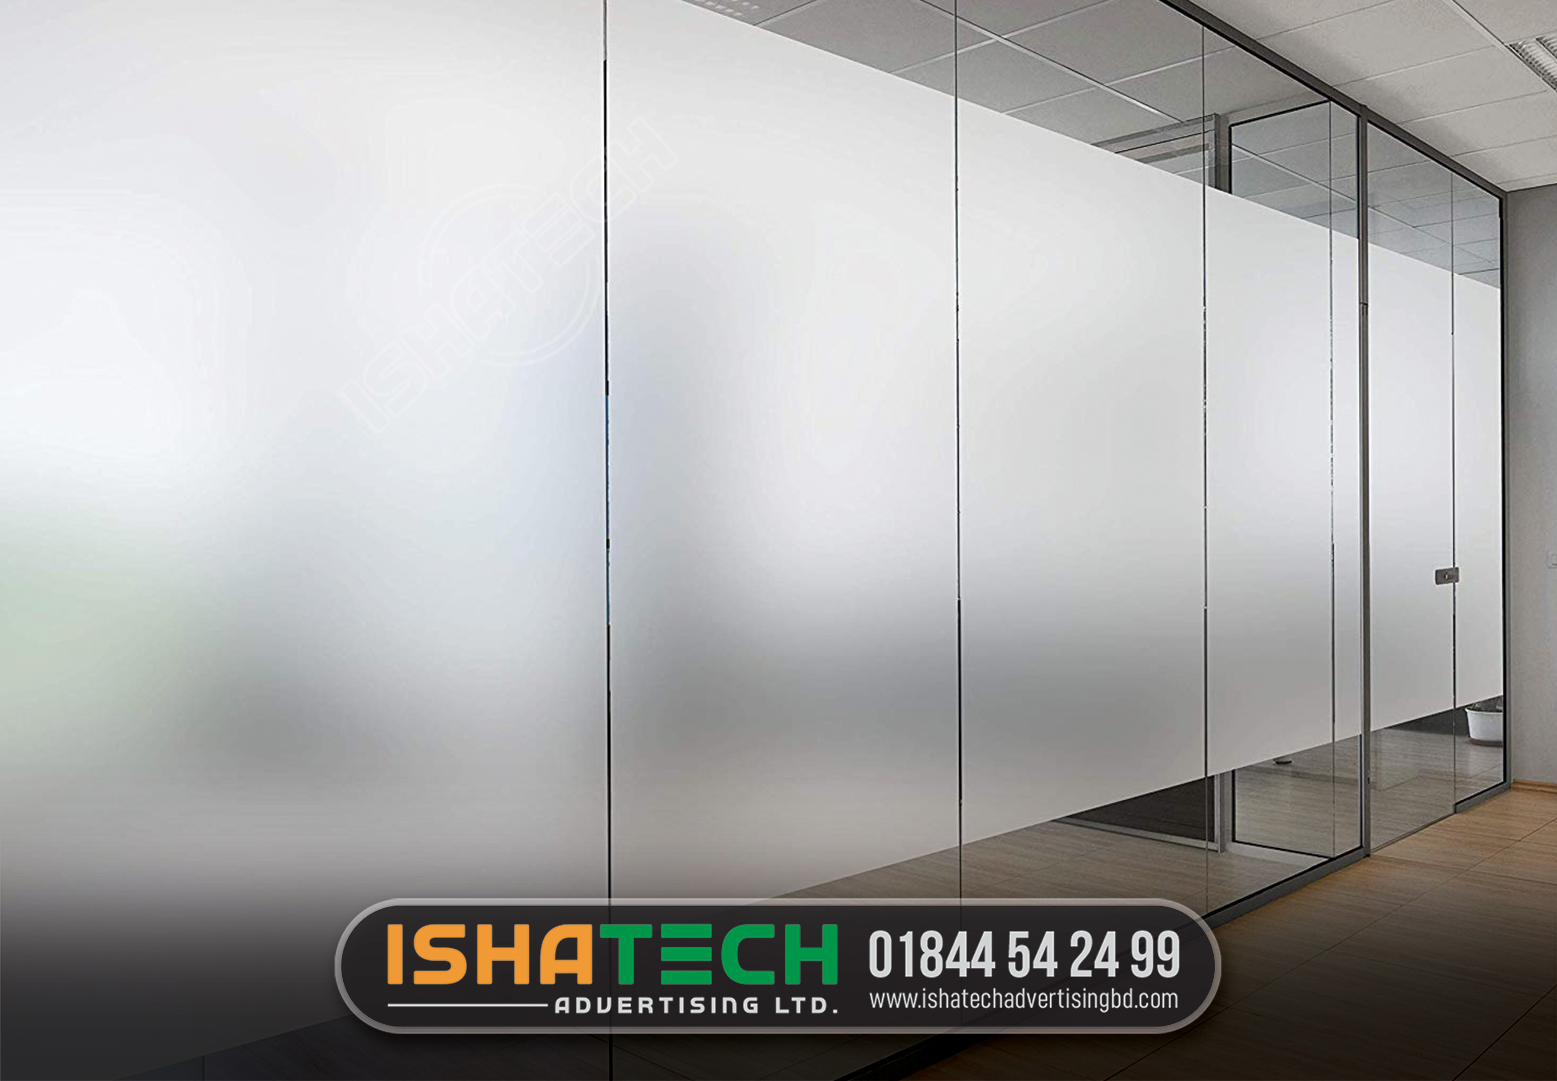 Indoor Frameless Clear Toughened Glass for Divider Partition Panel, Building Office Interior Design Partition Glass Doors Tempered Toughened Glass, Waterproof Static No Glue PVC Frosted Glass Stickers for Office Use, Aluminium Aluminum Partitions, 10 mm Thai Glass(120 square feet),